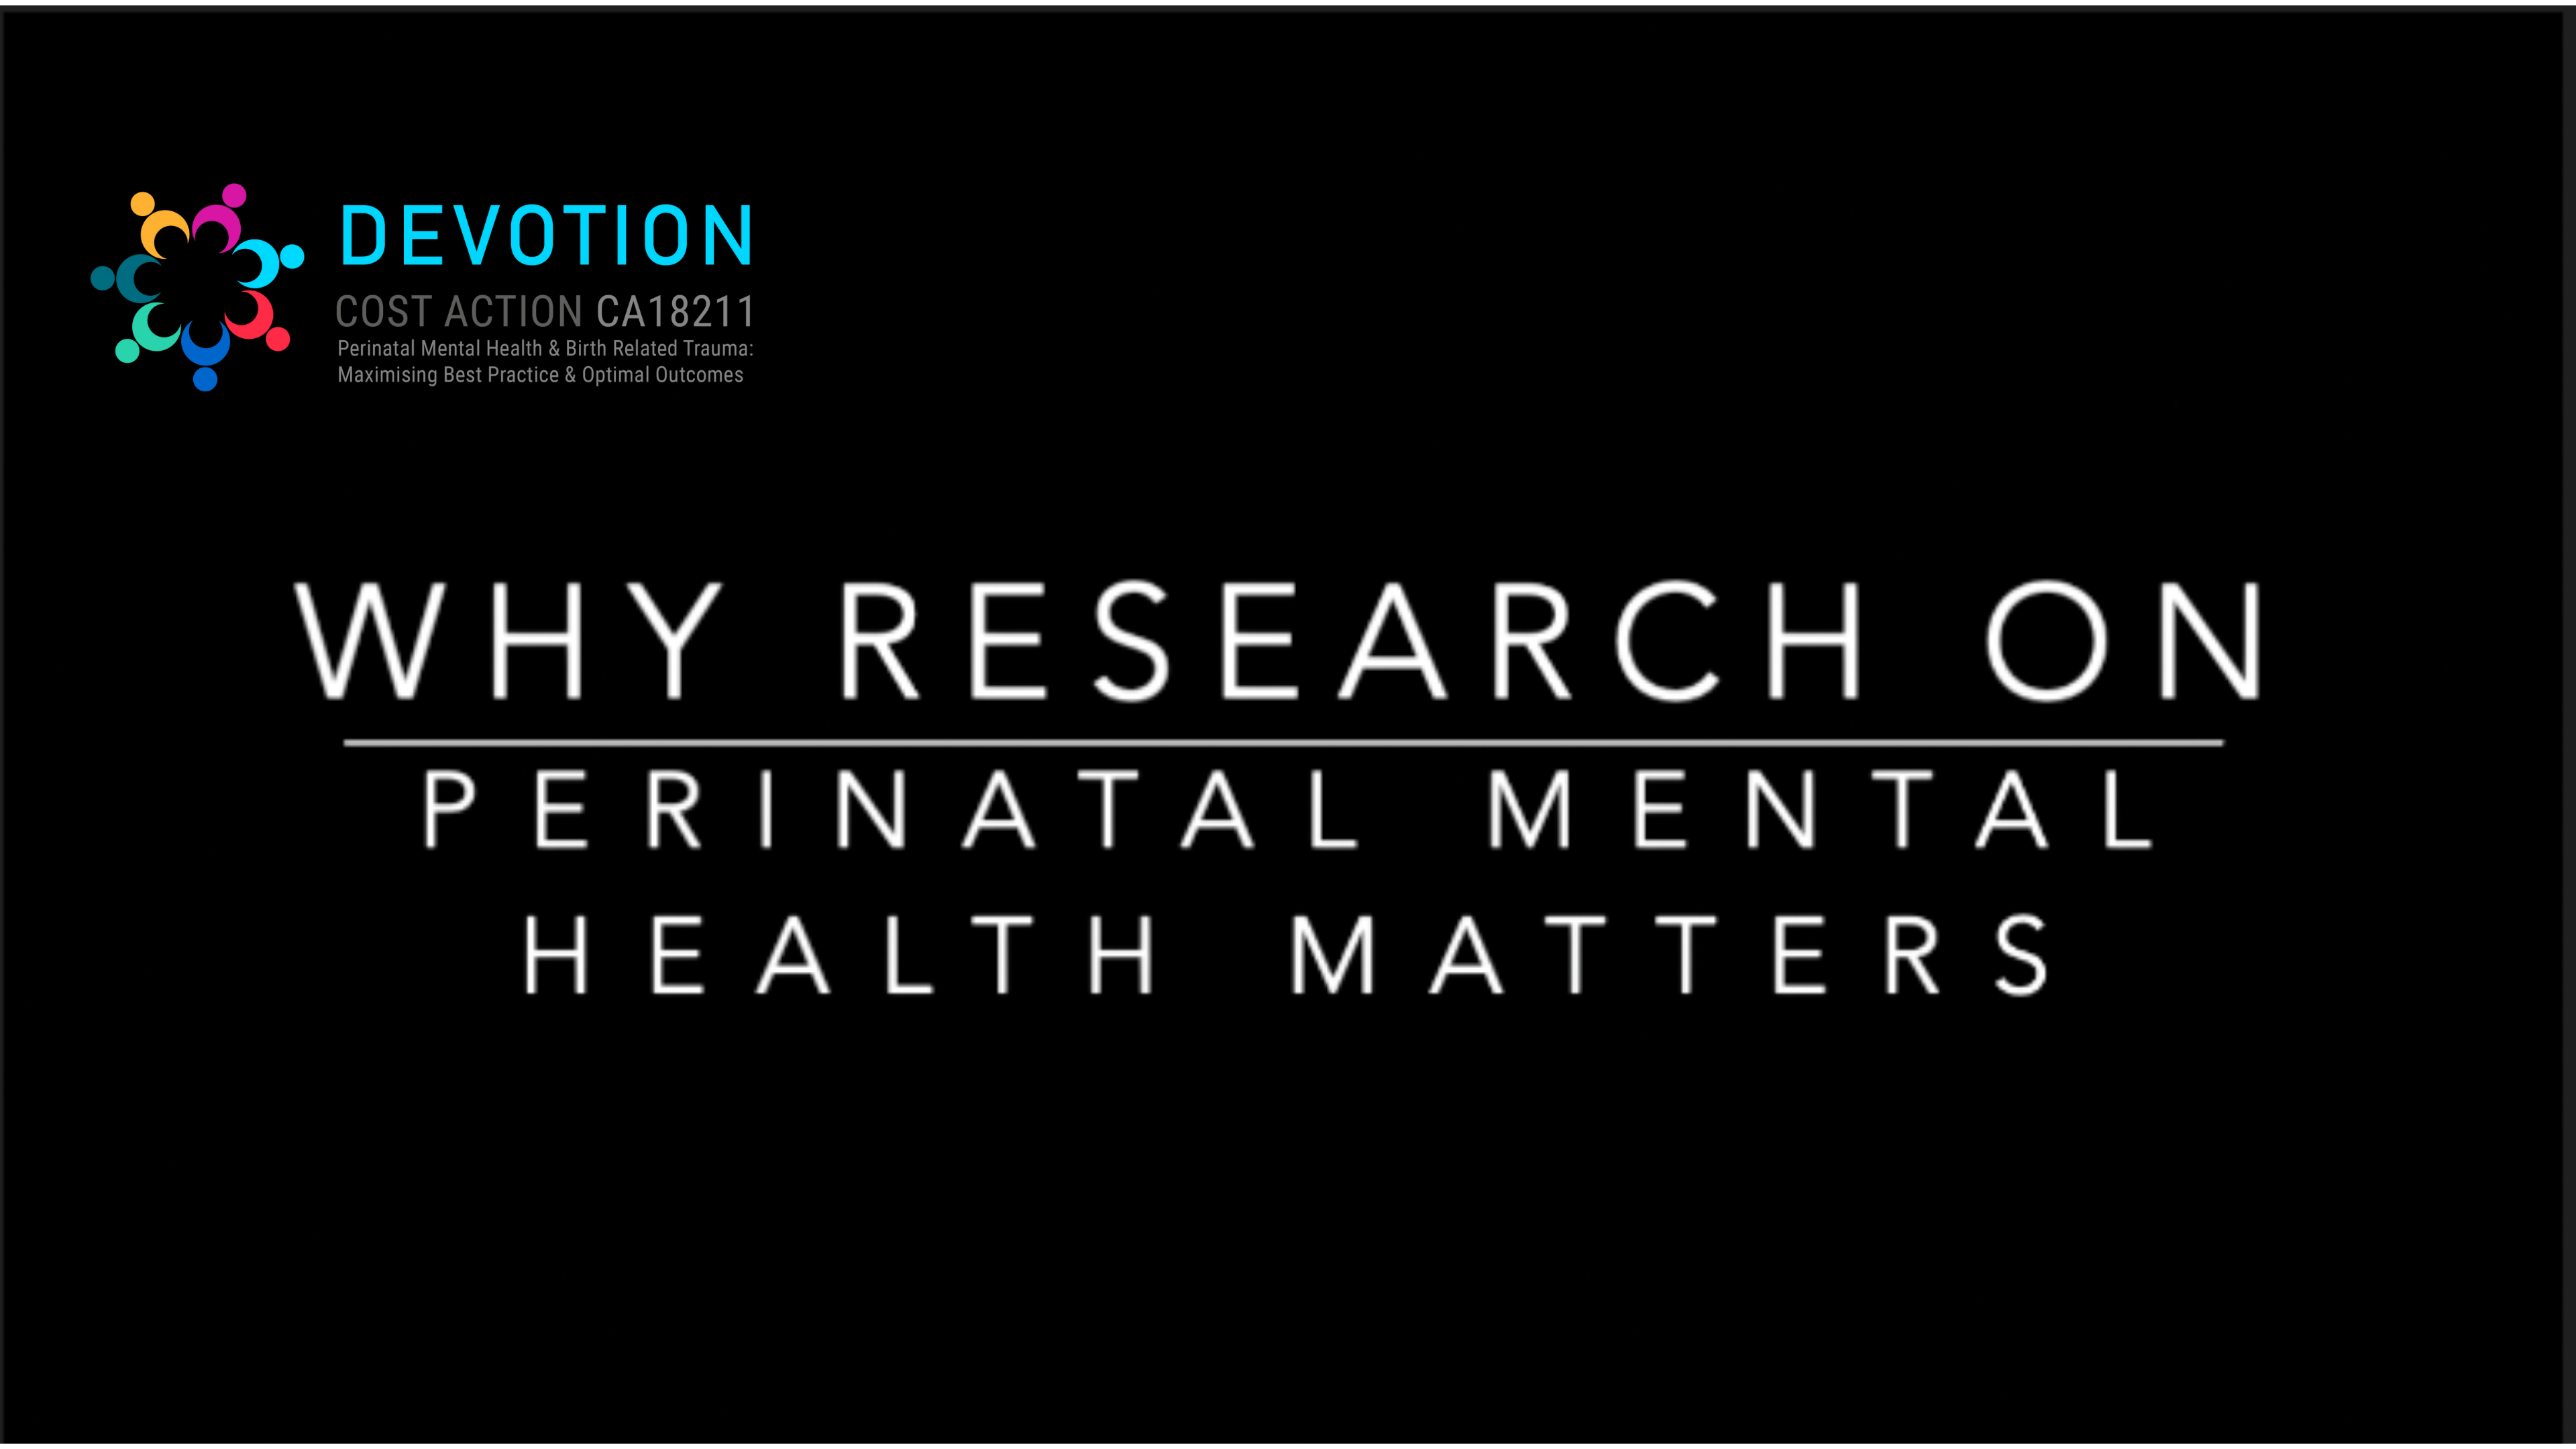 Logo of Cost Action 18211 and film title Why research on perinatal mental health matters